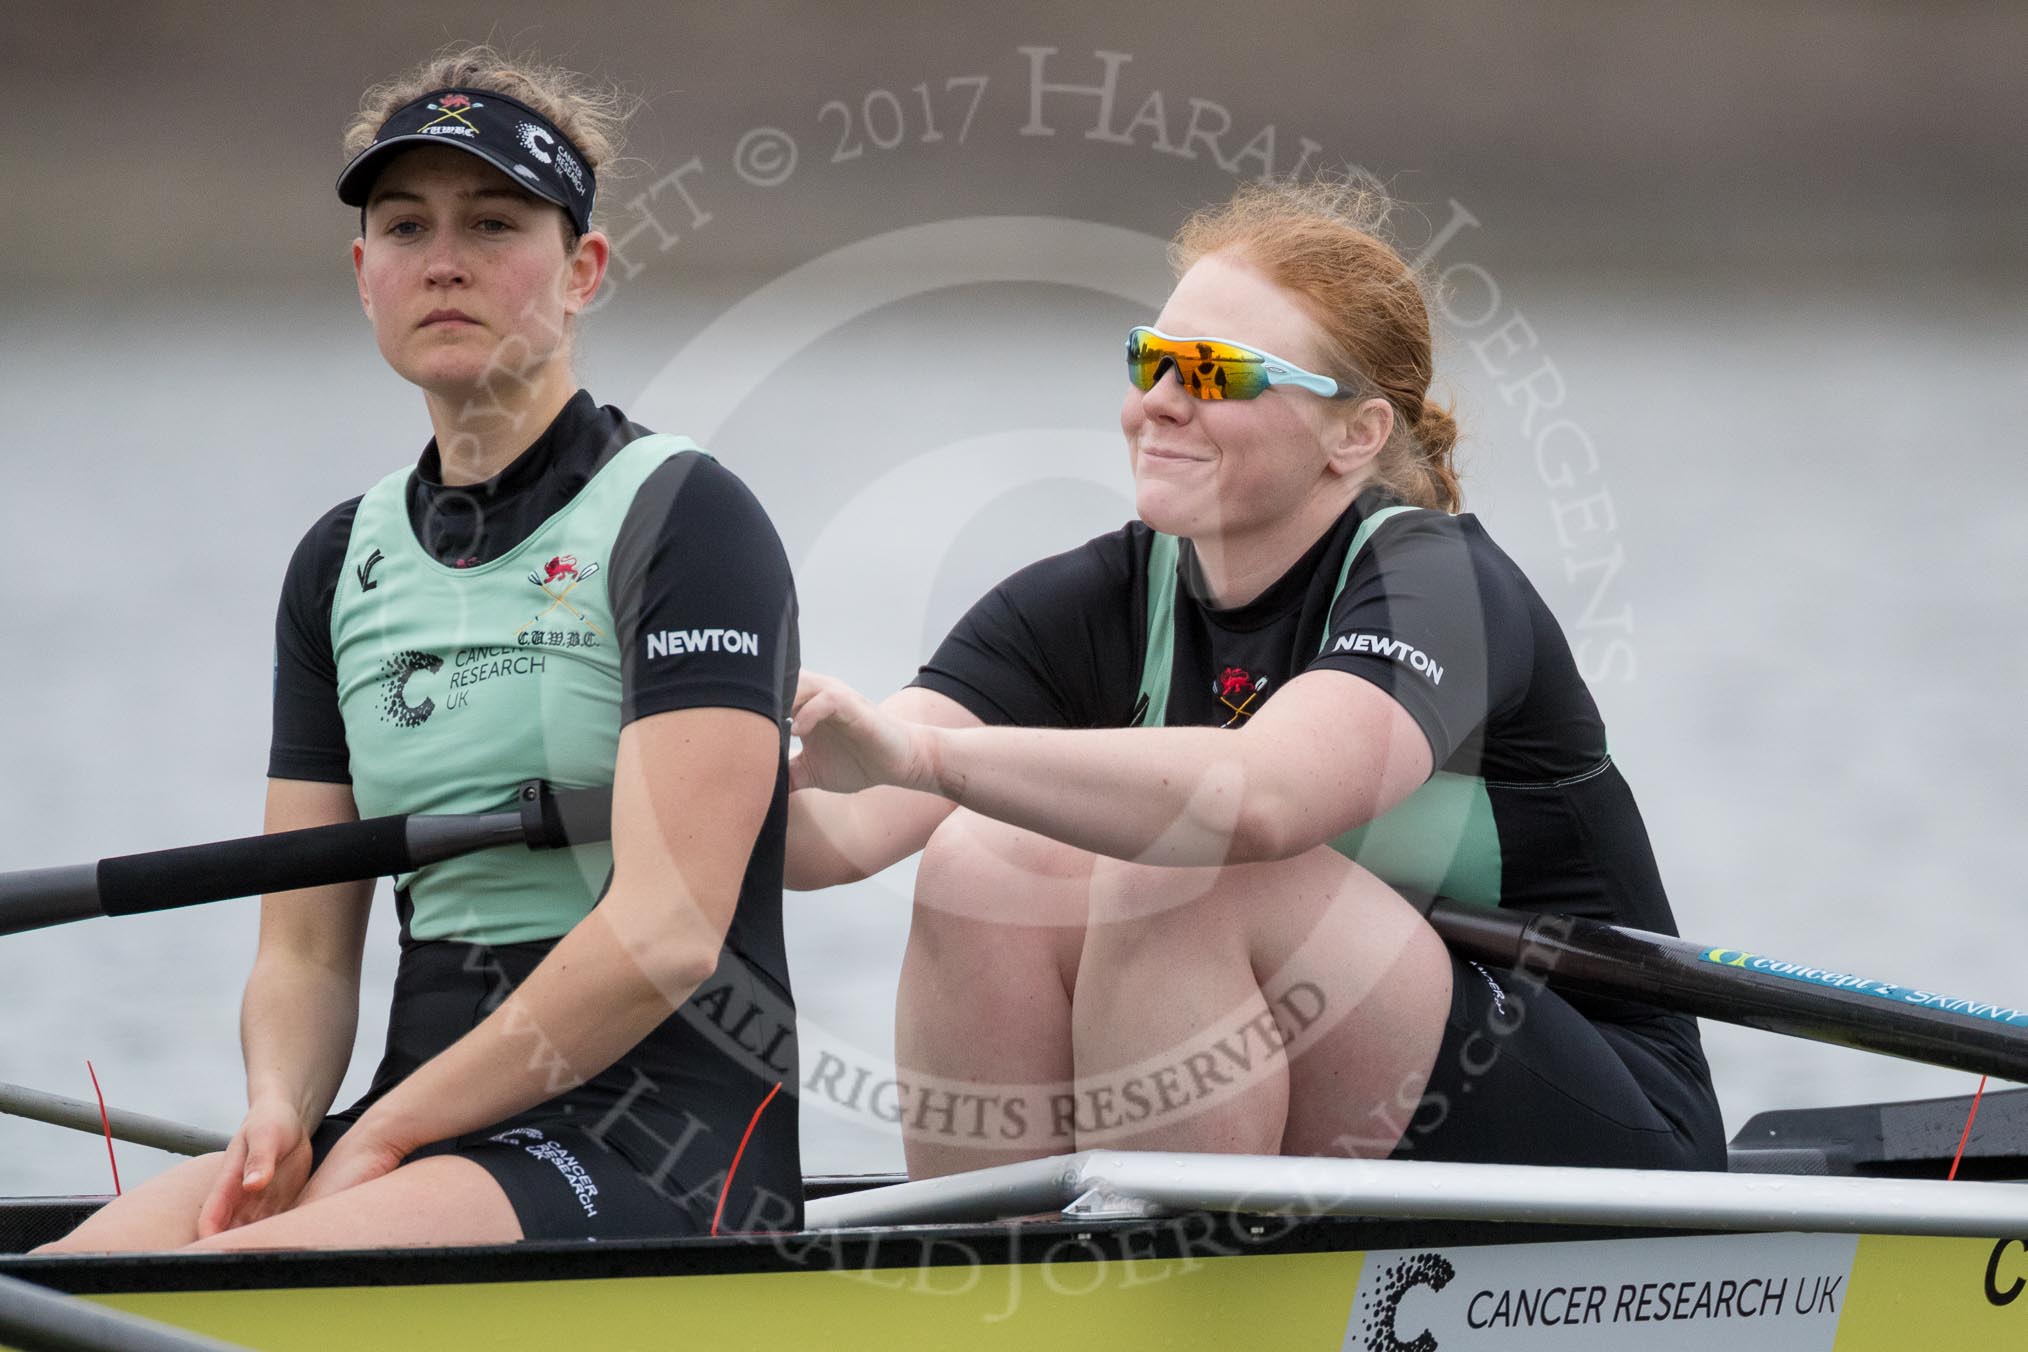 The Boat Race season 2017 - Women's Boat Race Fixture CUWBC vs Univerity of London: The CUWBC eight before the start of the race, here 2 - Kirsten Van Fosen, bow - Claire Lambe.
River Thames between Putney Bridge and Mortlake,
London SW15,

United Kingdom,
on 19 February 2017 at 15:54, image #42